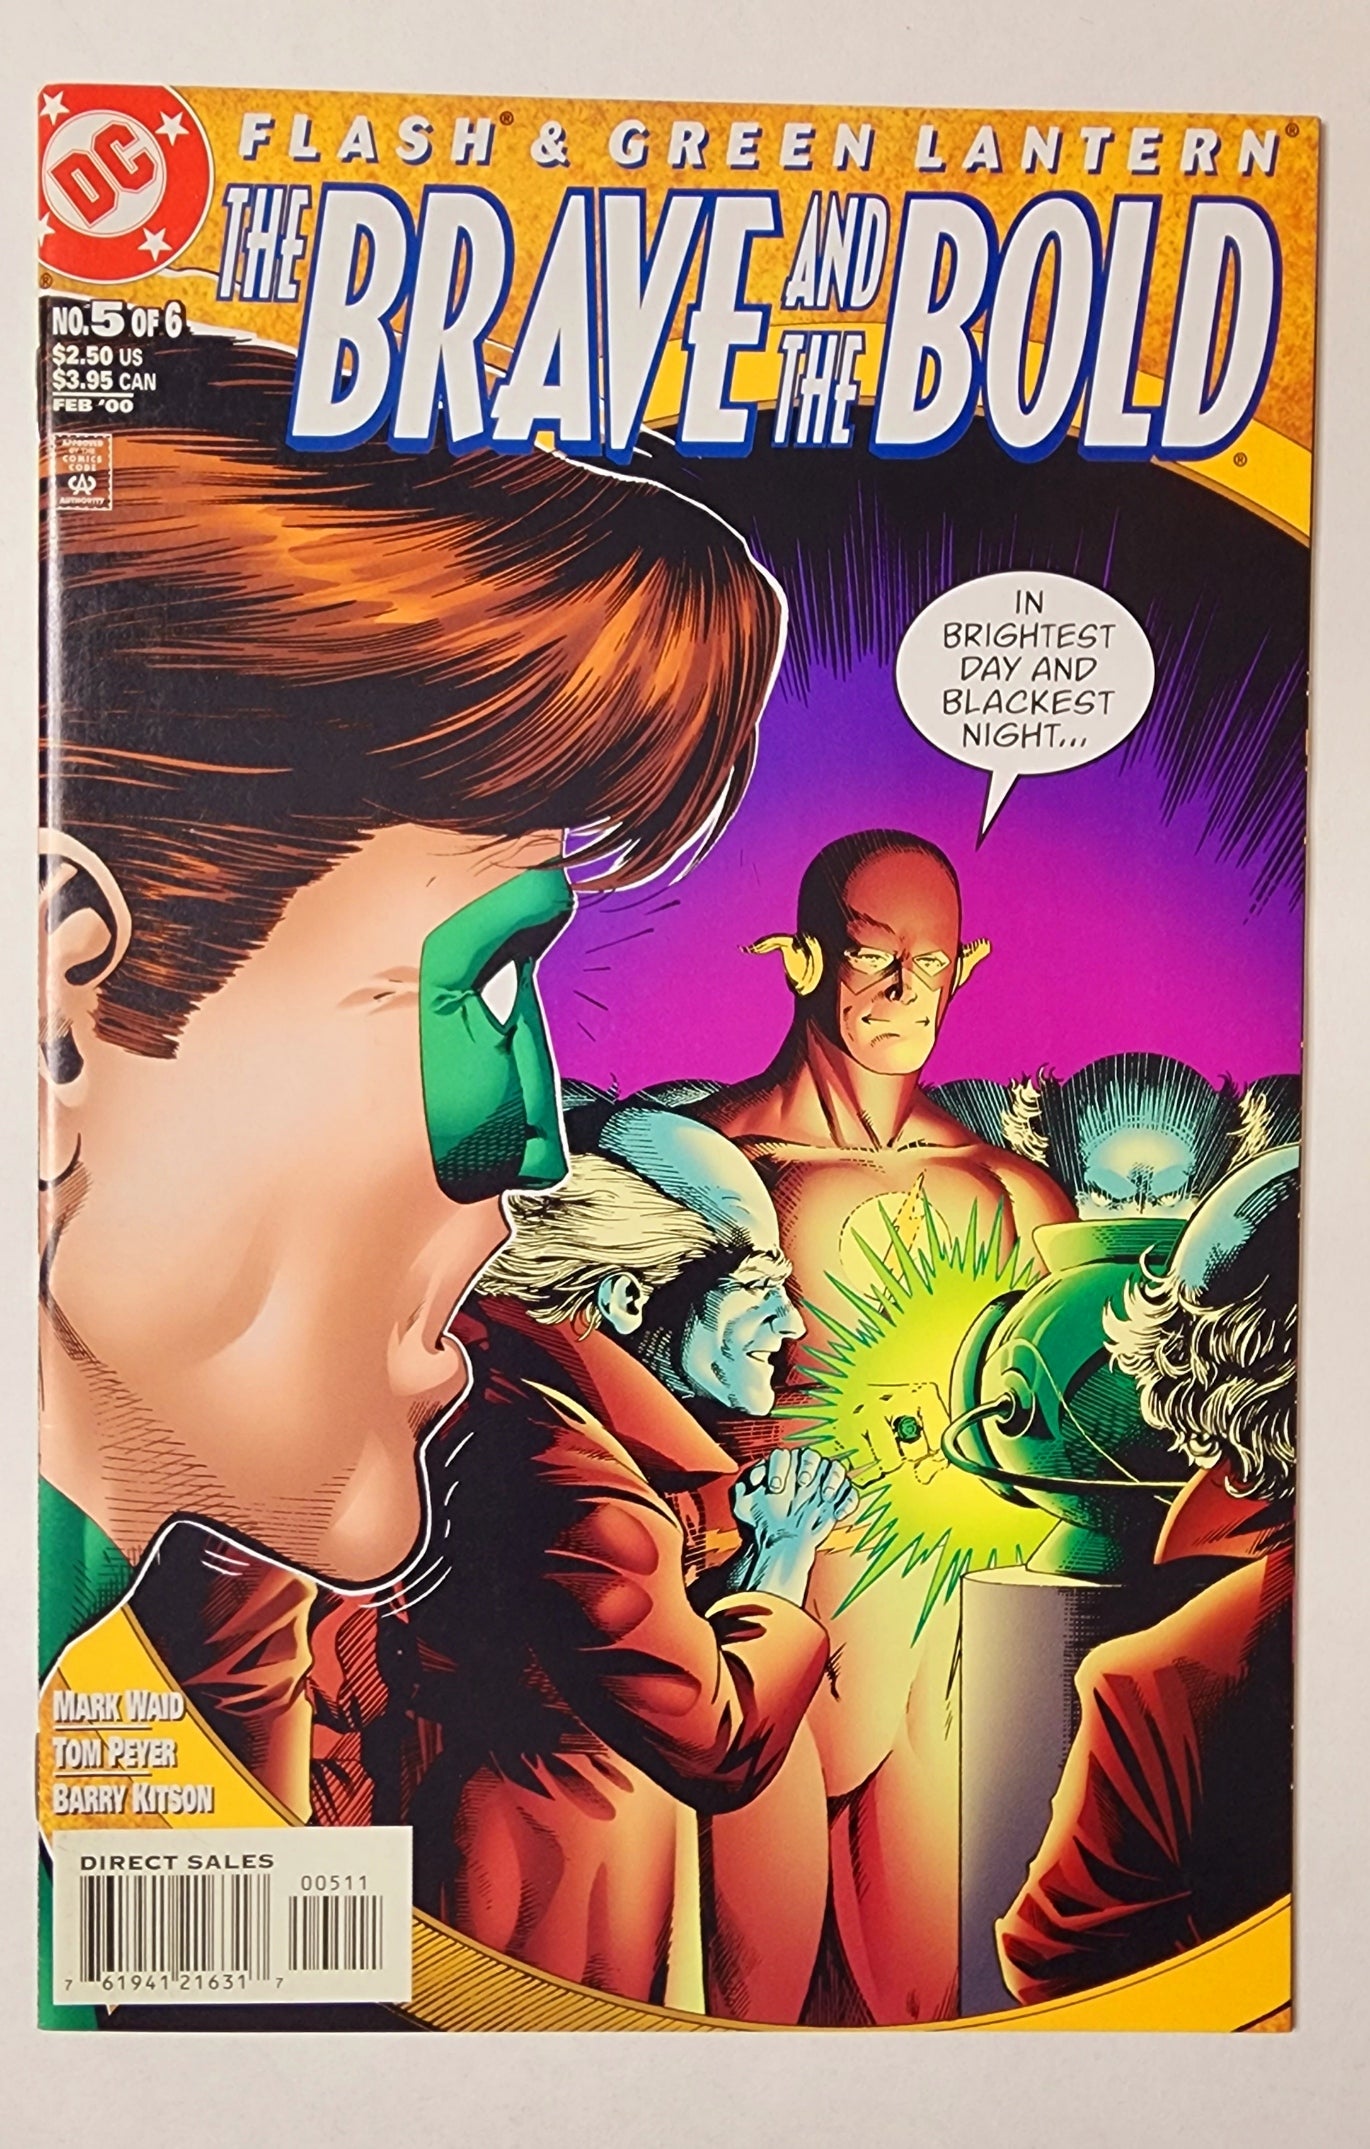 Flash & Green Lantern: The Brave And the Bold #5 (VF+)